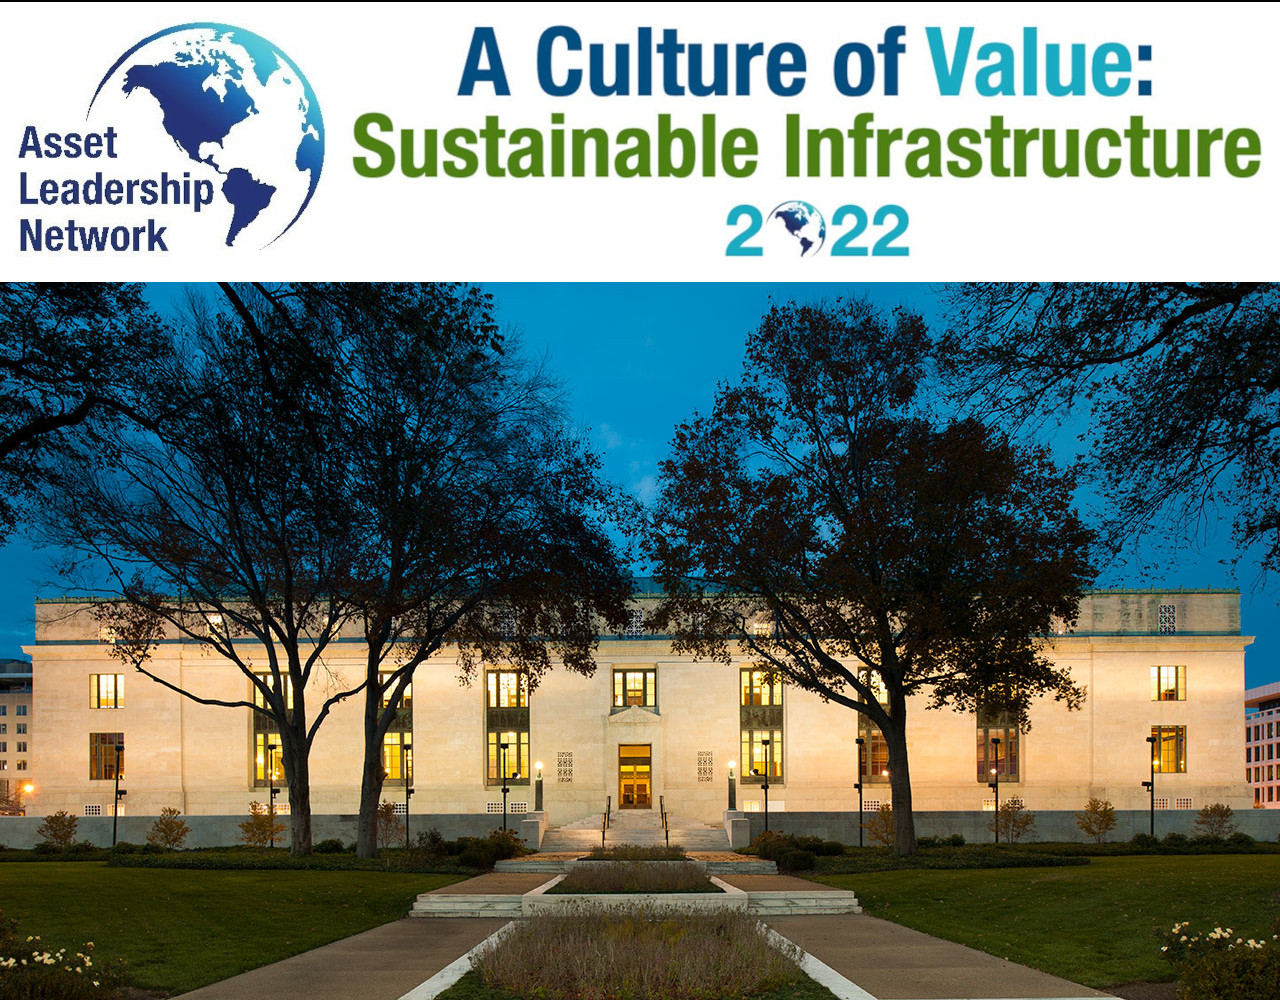 A Culture of Value: Sustainable Infrastructure